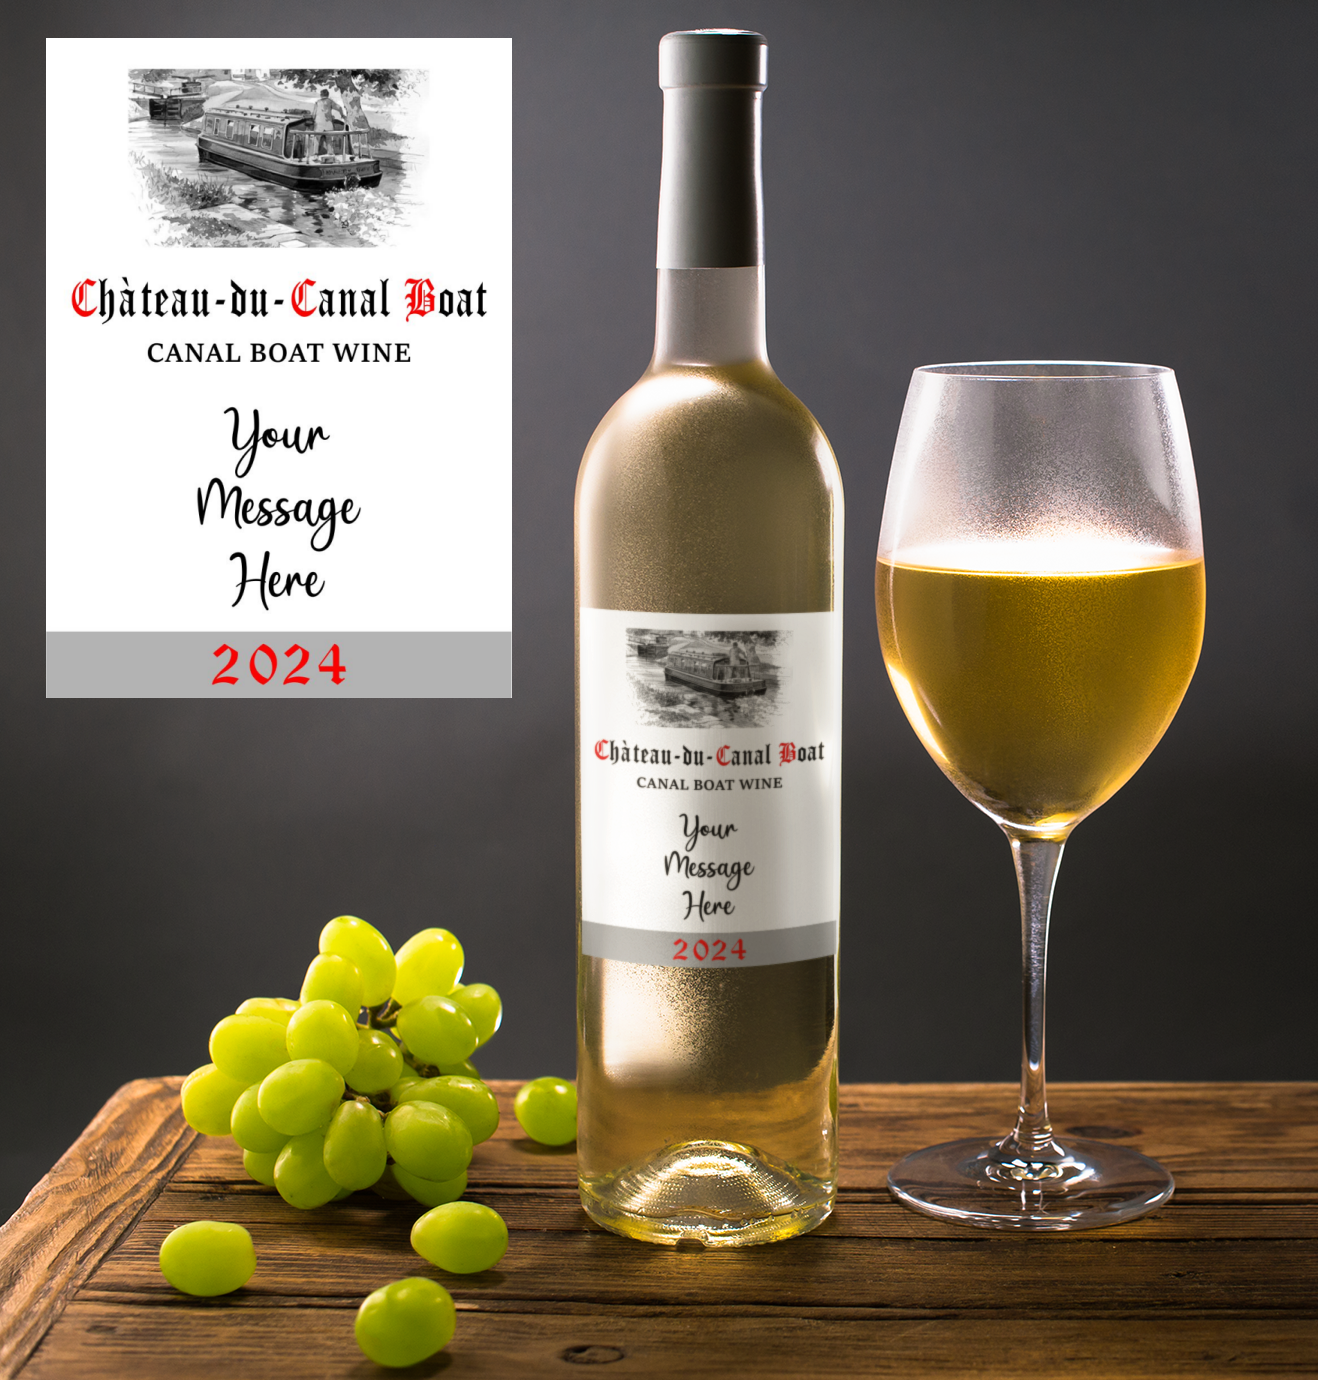 Boating Wine Bottle Label x2 - Chateau du Canal Boat - Personalise Year & Message - To fit Most Alcohol Bottles Custom Gift